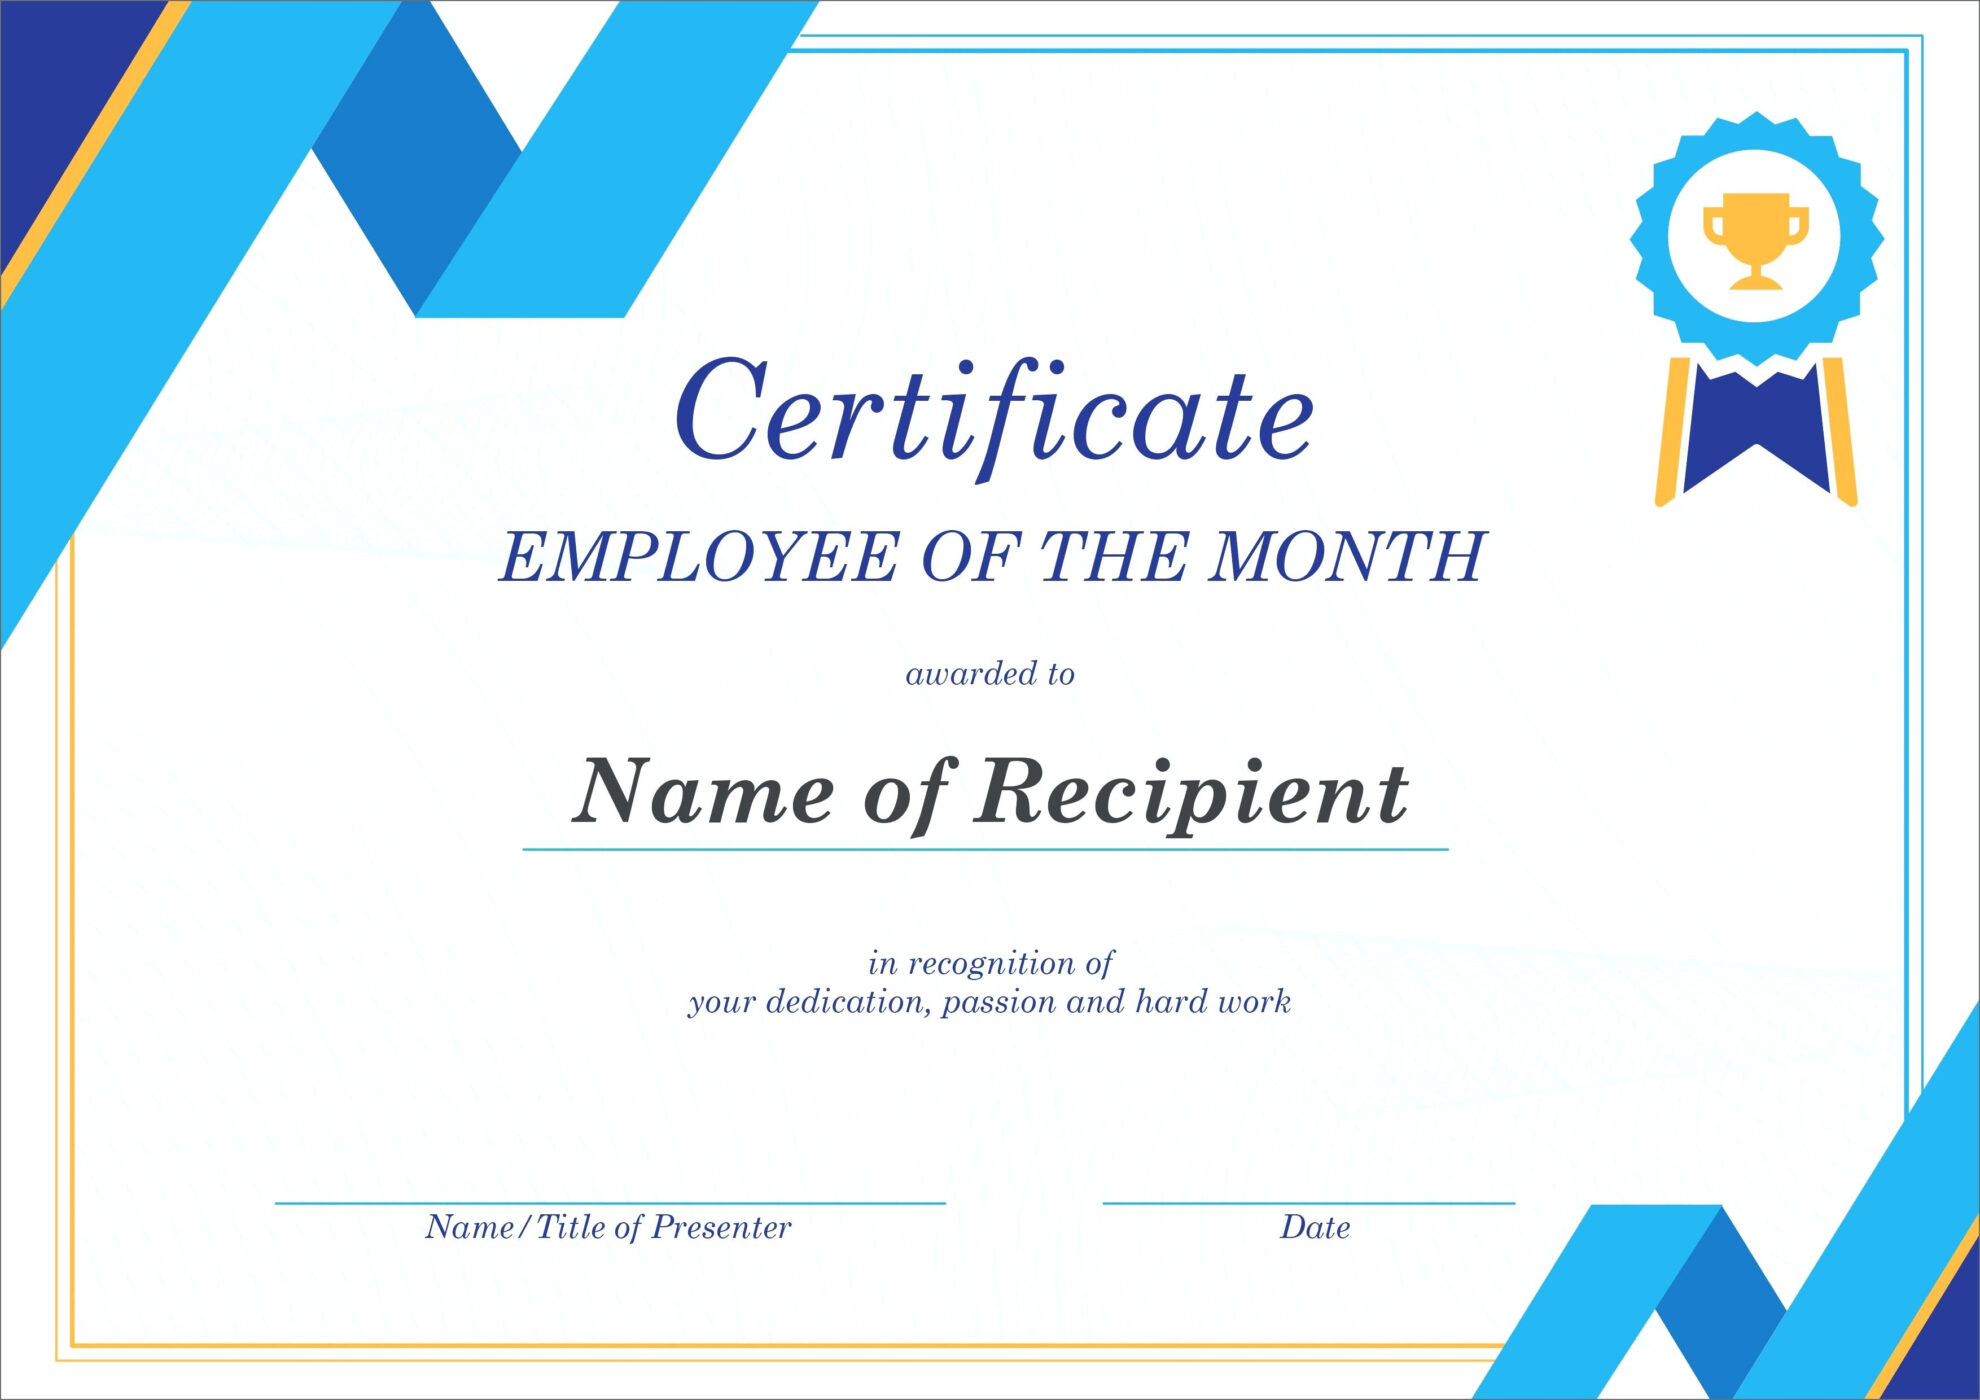 Is There A Certificate Template In Microsoft Word